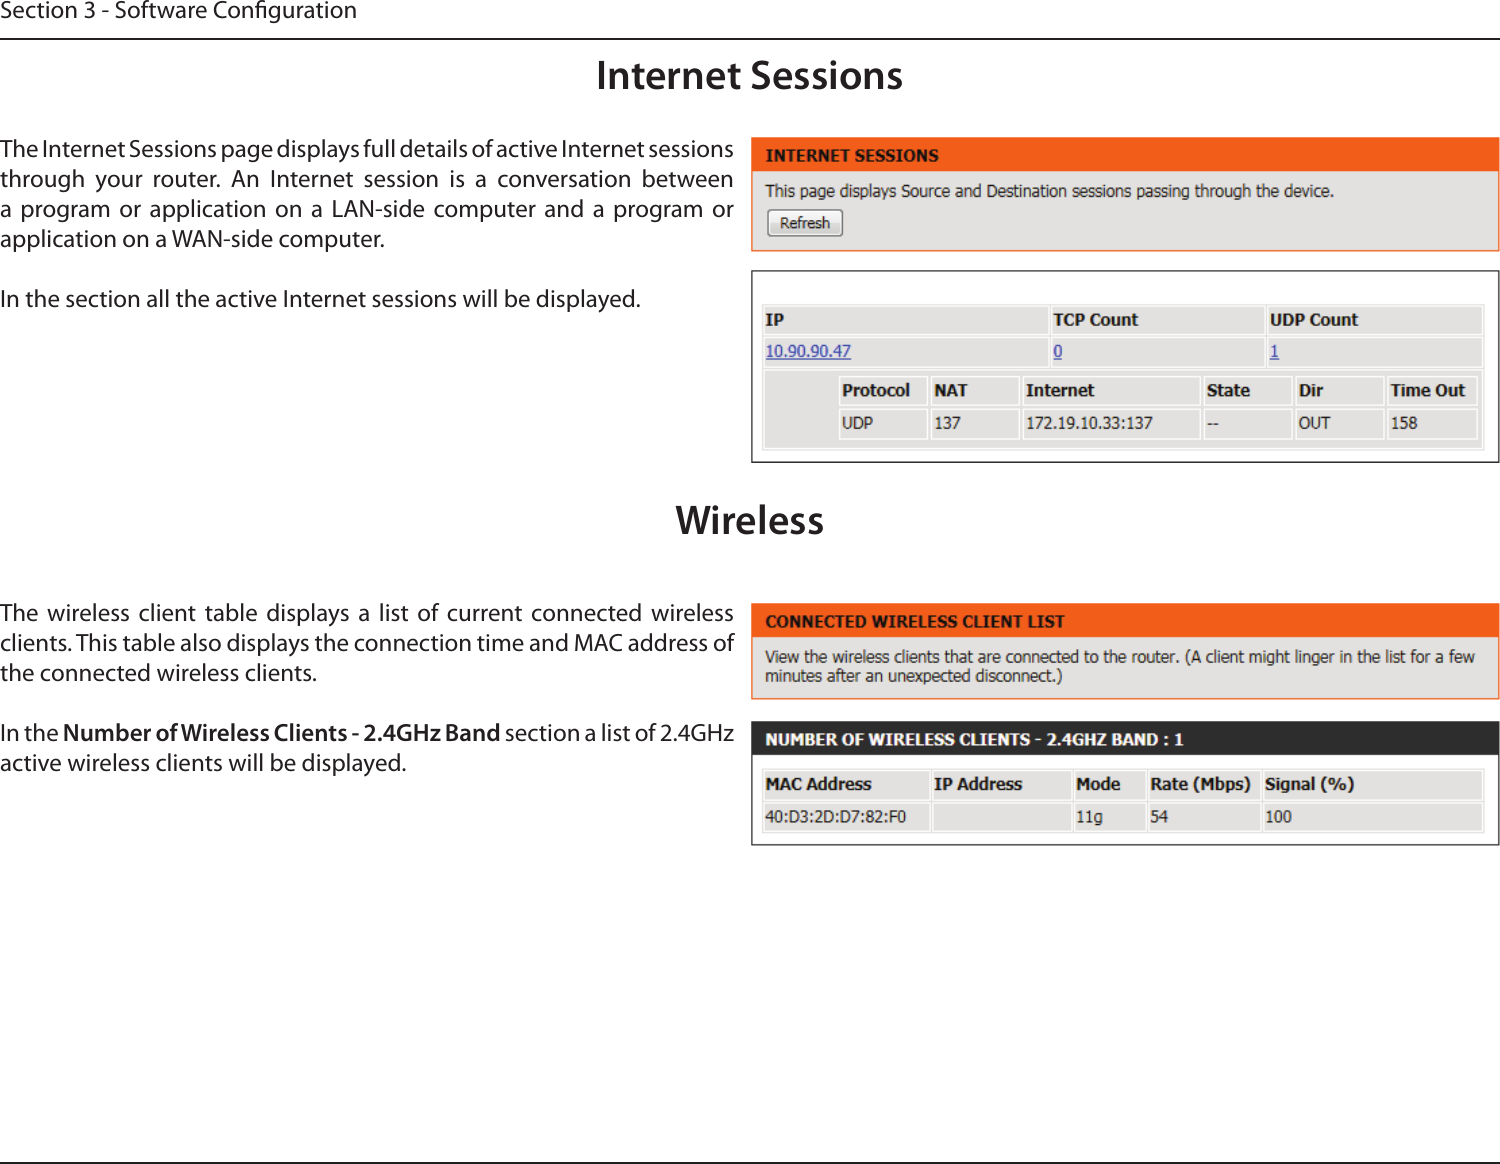 Section 3 - Software CongurationInternet SessionsThe Internet Sessions page displays full details of active Internet sessions through  your  router.  An  Internet  session  is  a  conversation  between a  program or  application  on  a  LAN-side  computer and  a  program  or application on a WAN-side computer.In the section all the active Internet sessions will be displayed.WirelessThe  wireless  client  table  displays  a  list  of  current connected  wireless clients. This table also displays the connection time and MAC address of the connected wireless clients.In the Number of Wireless Clients - 2.4GHz Band section a list of 2.4GHz active wireless clients will be displayed.